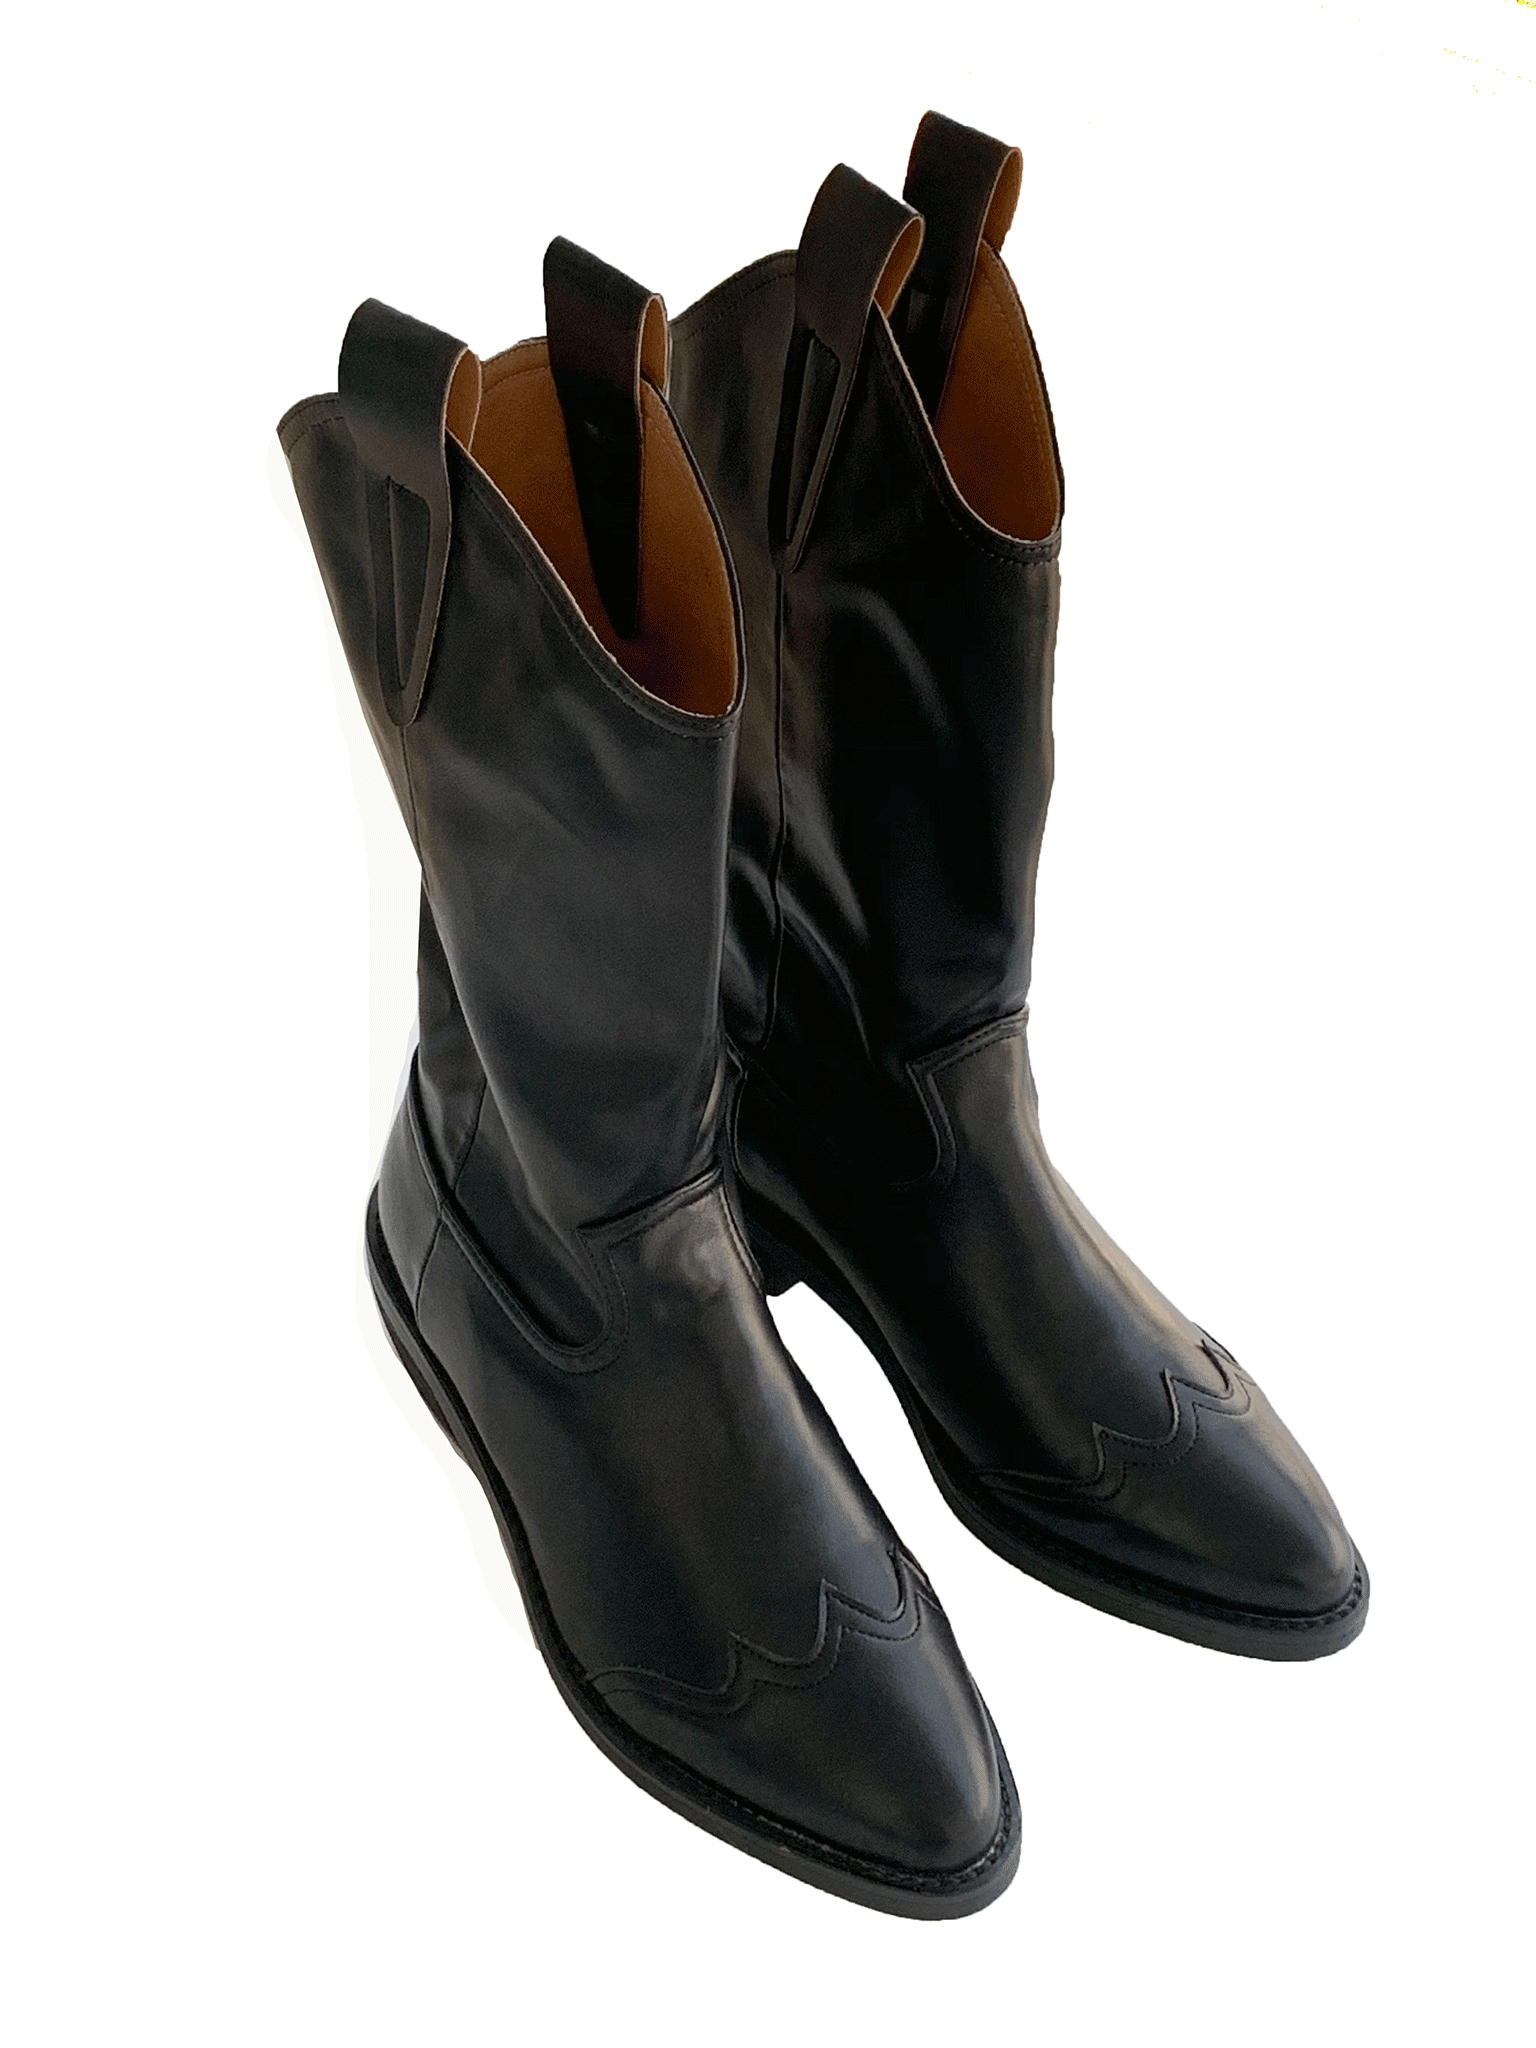 Western half boots (one color)